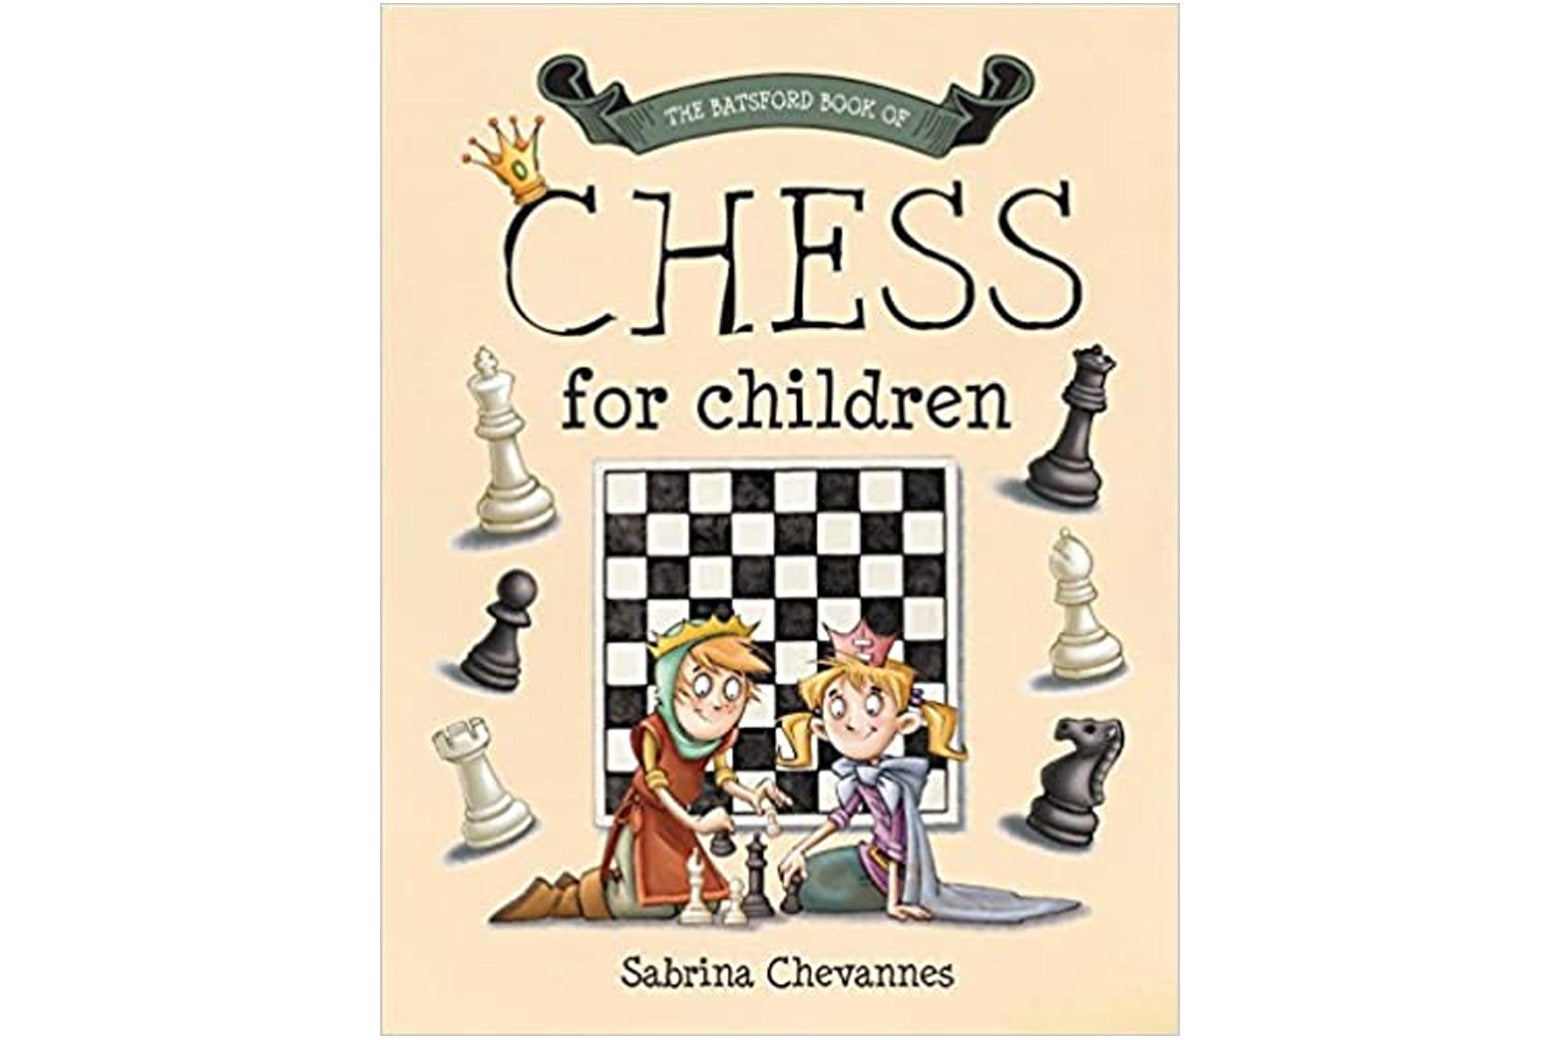 Chess for Children book jacket